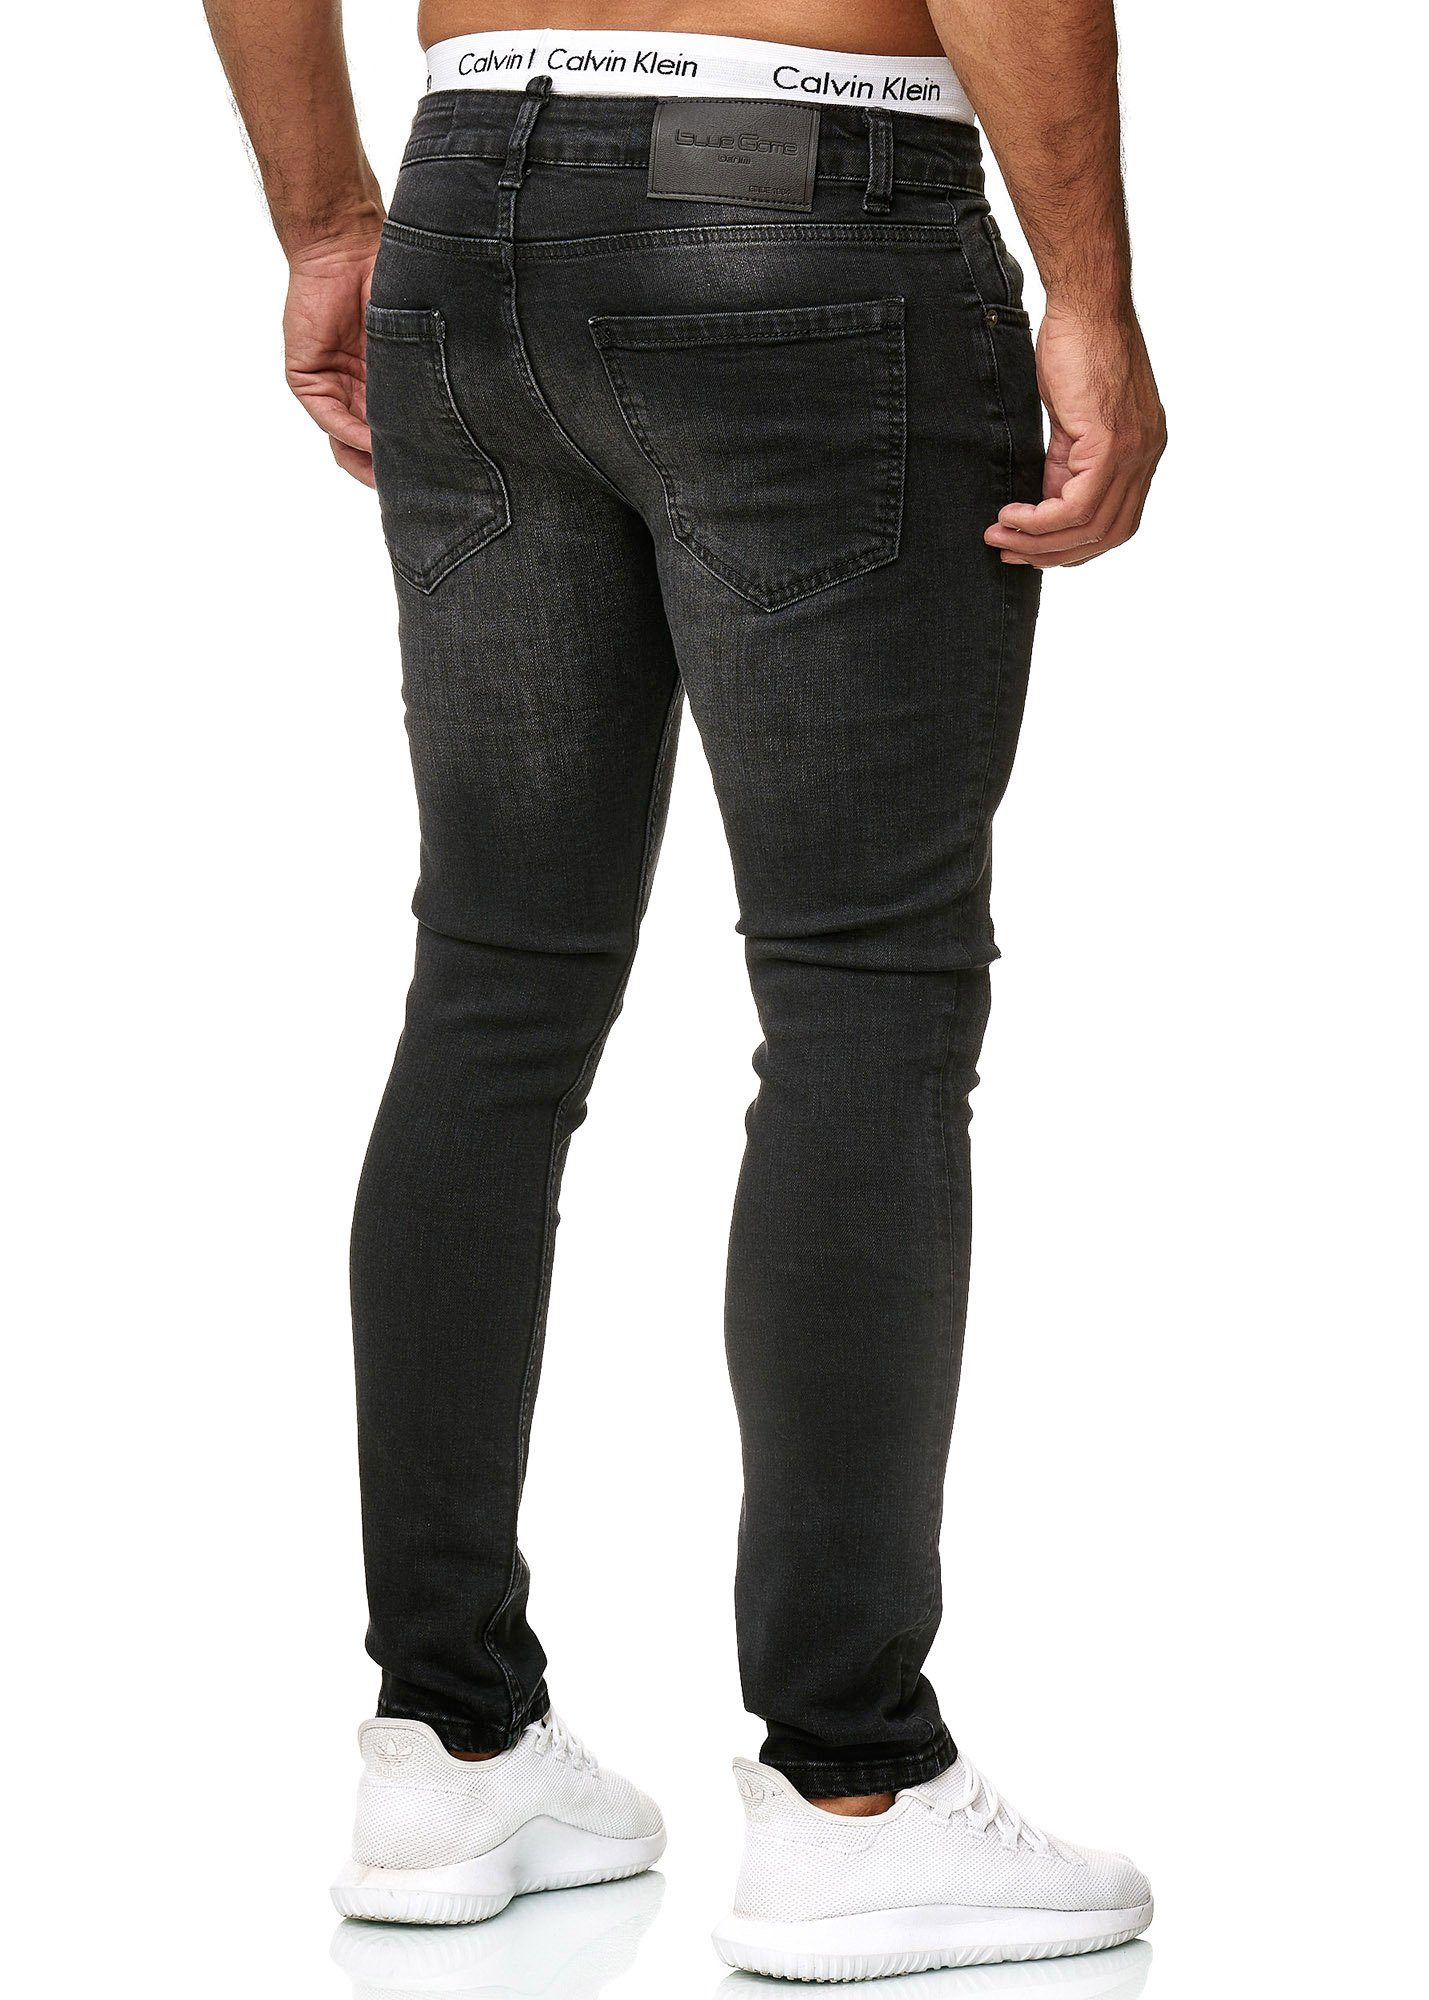 Casual Freizeit 600JS Straight-Jeans Used Black Dirty Designerjeans Business Bootcut, 604 (Jeanshose 1-tlg) OneRedox